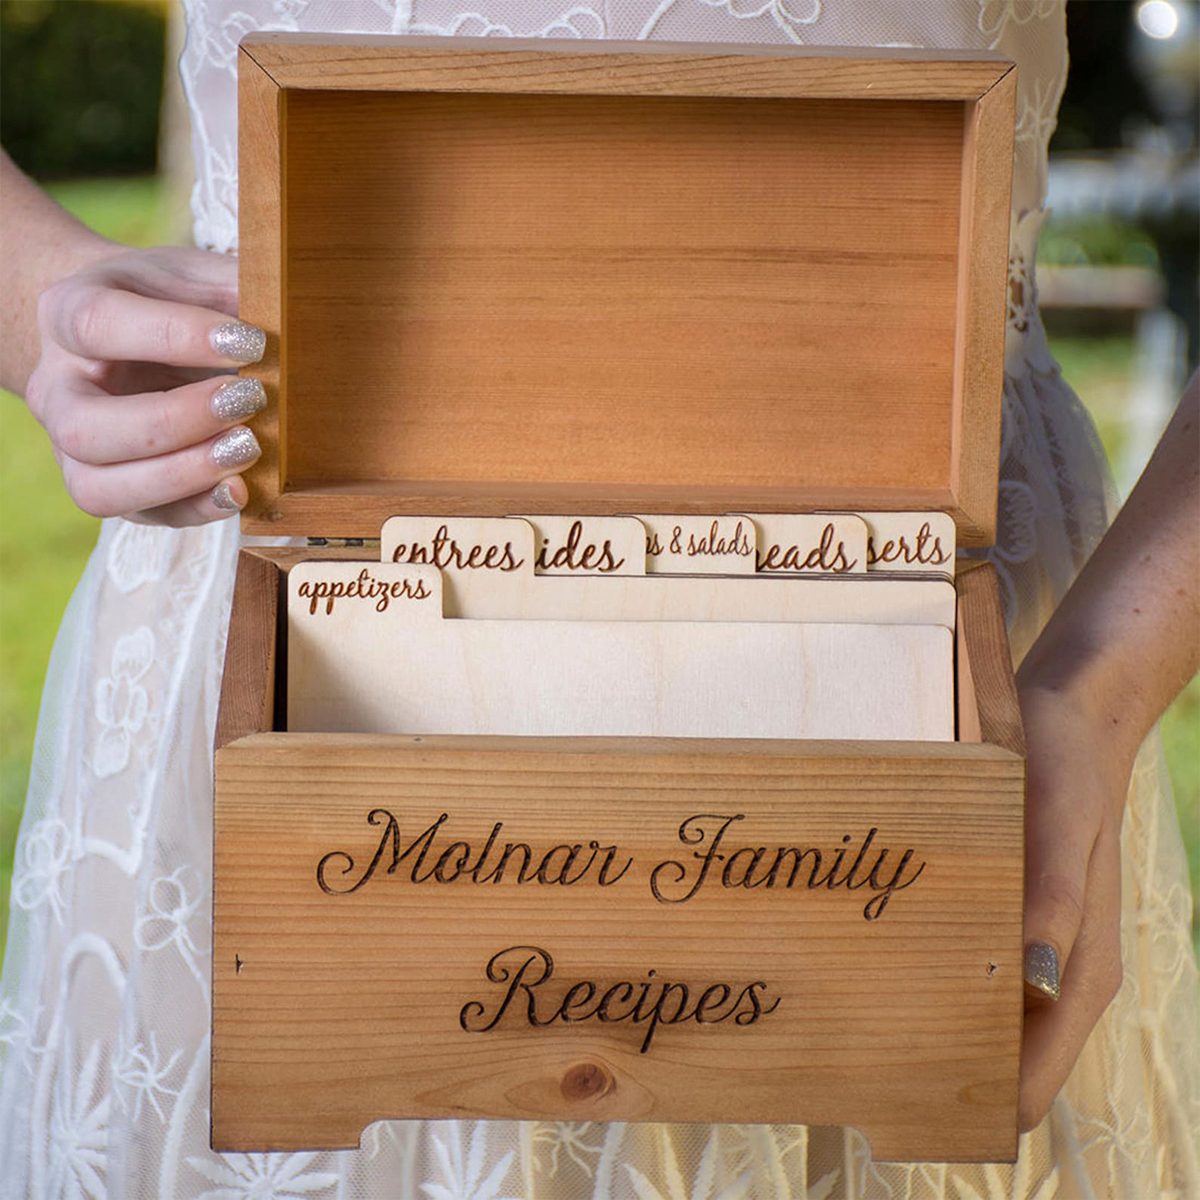 Personalized Recipe Cards and Box for Mom